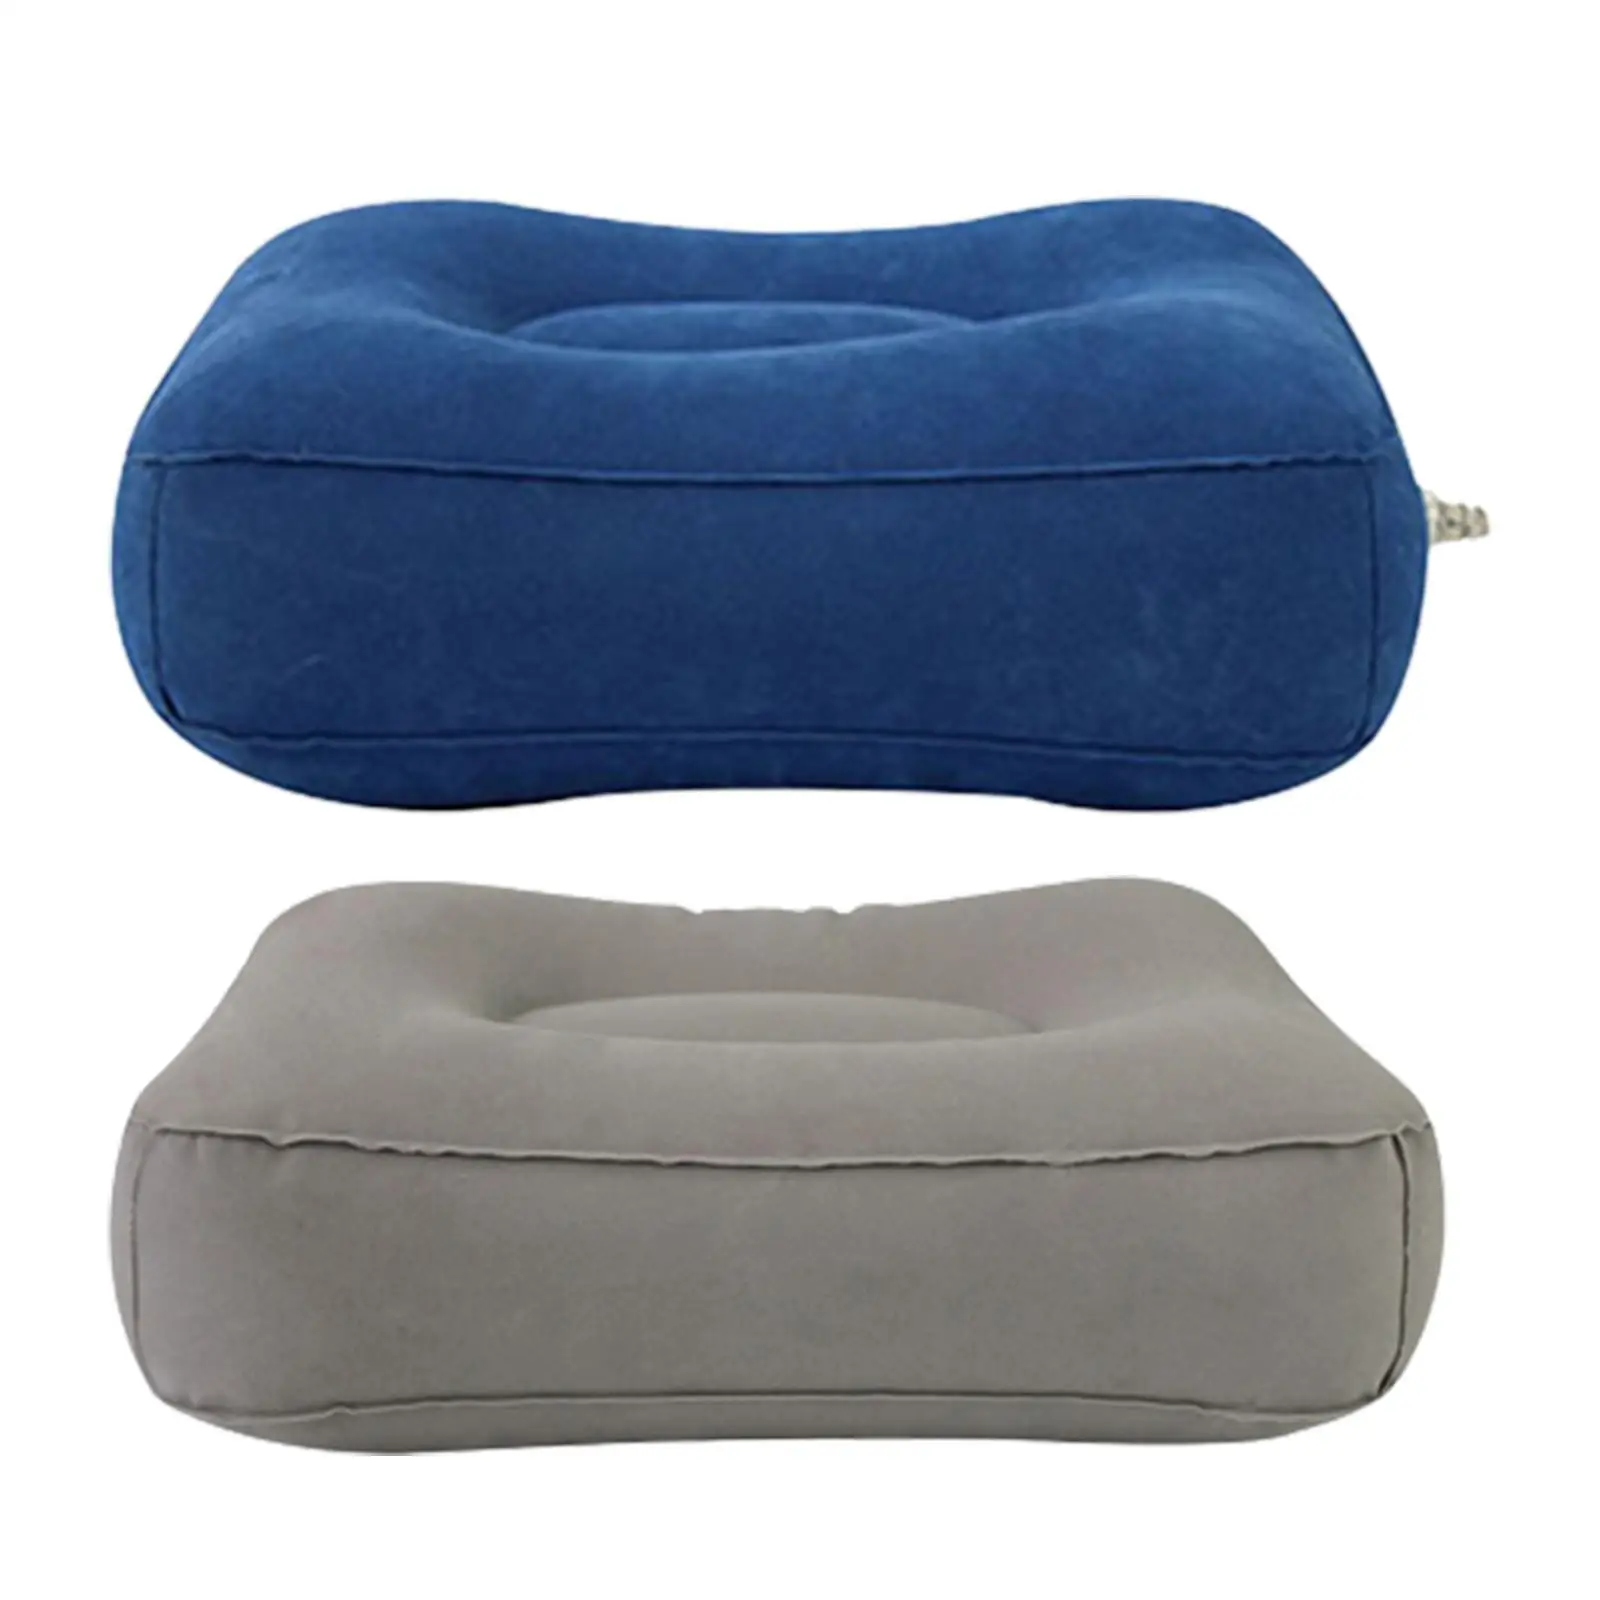 Inflatable Stool Ottoman Foot Rest Cushion Inflatable Foot Rest Mat Foot Rest Pillow for Train Home Plane Camping Mat 42x32x20cm